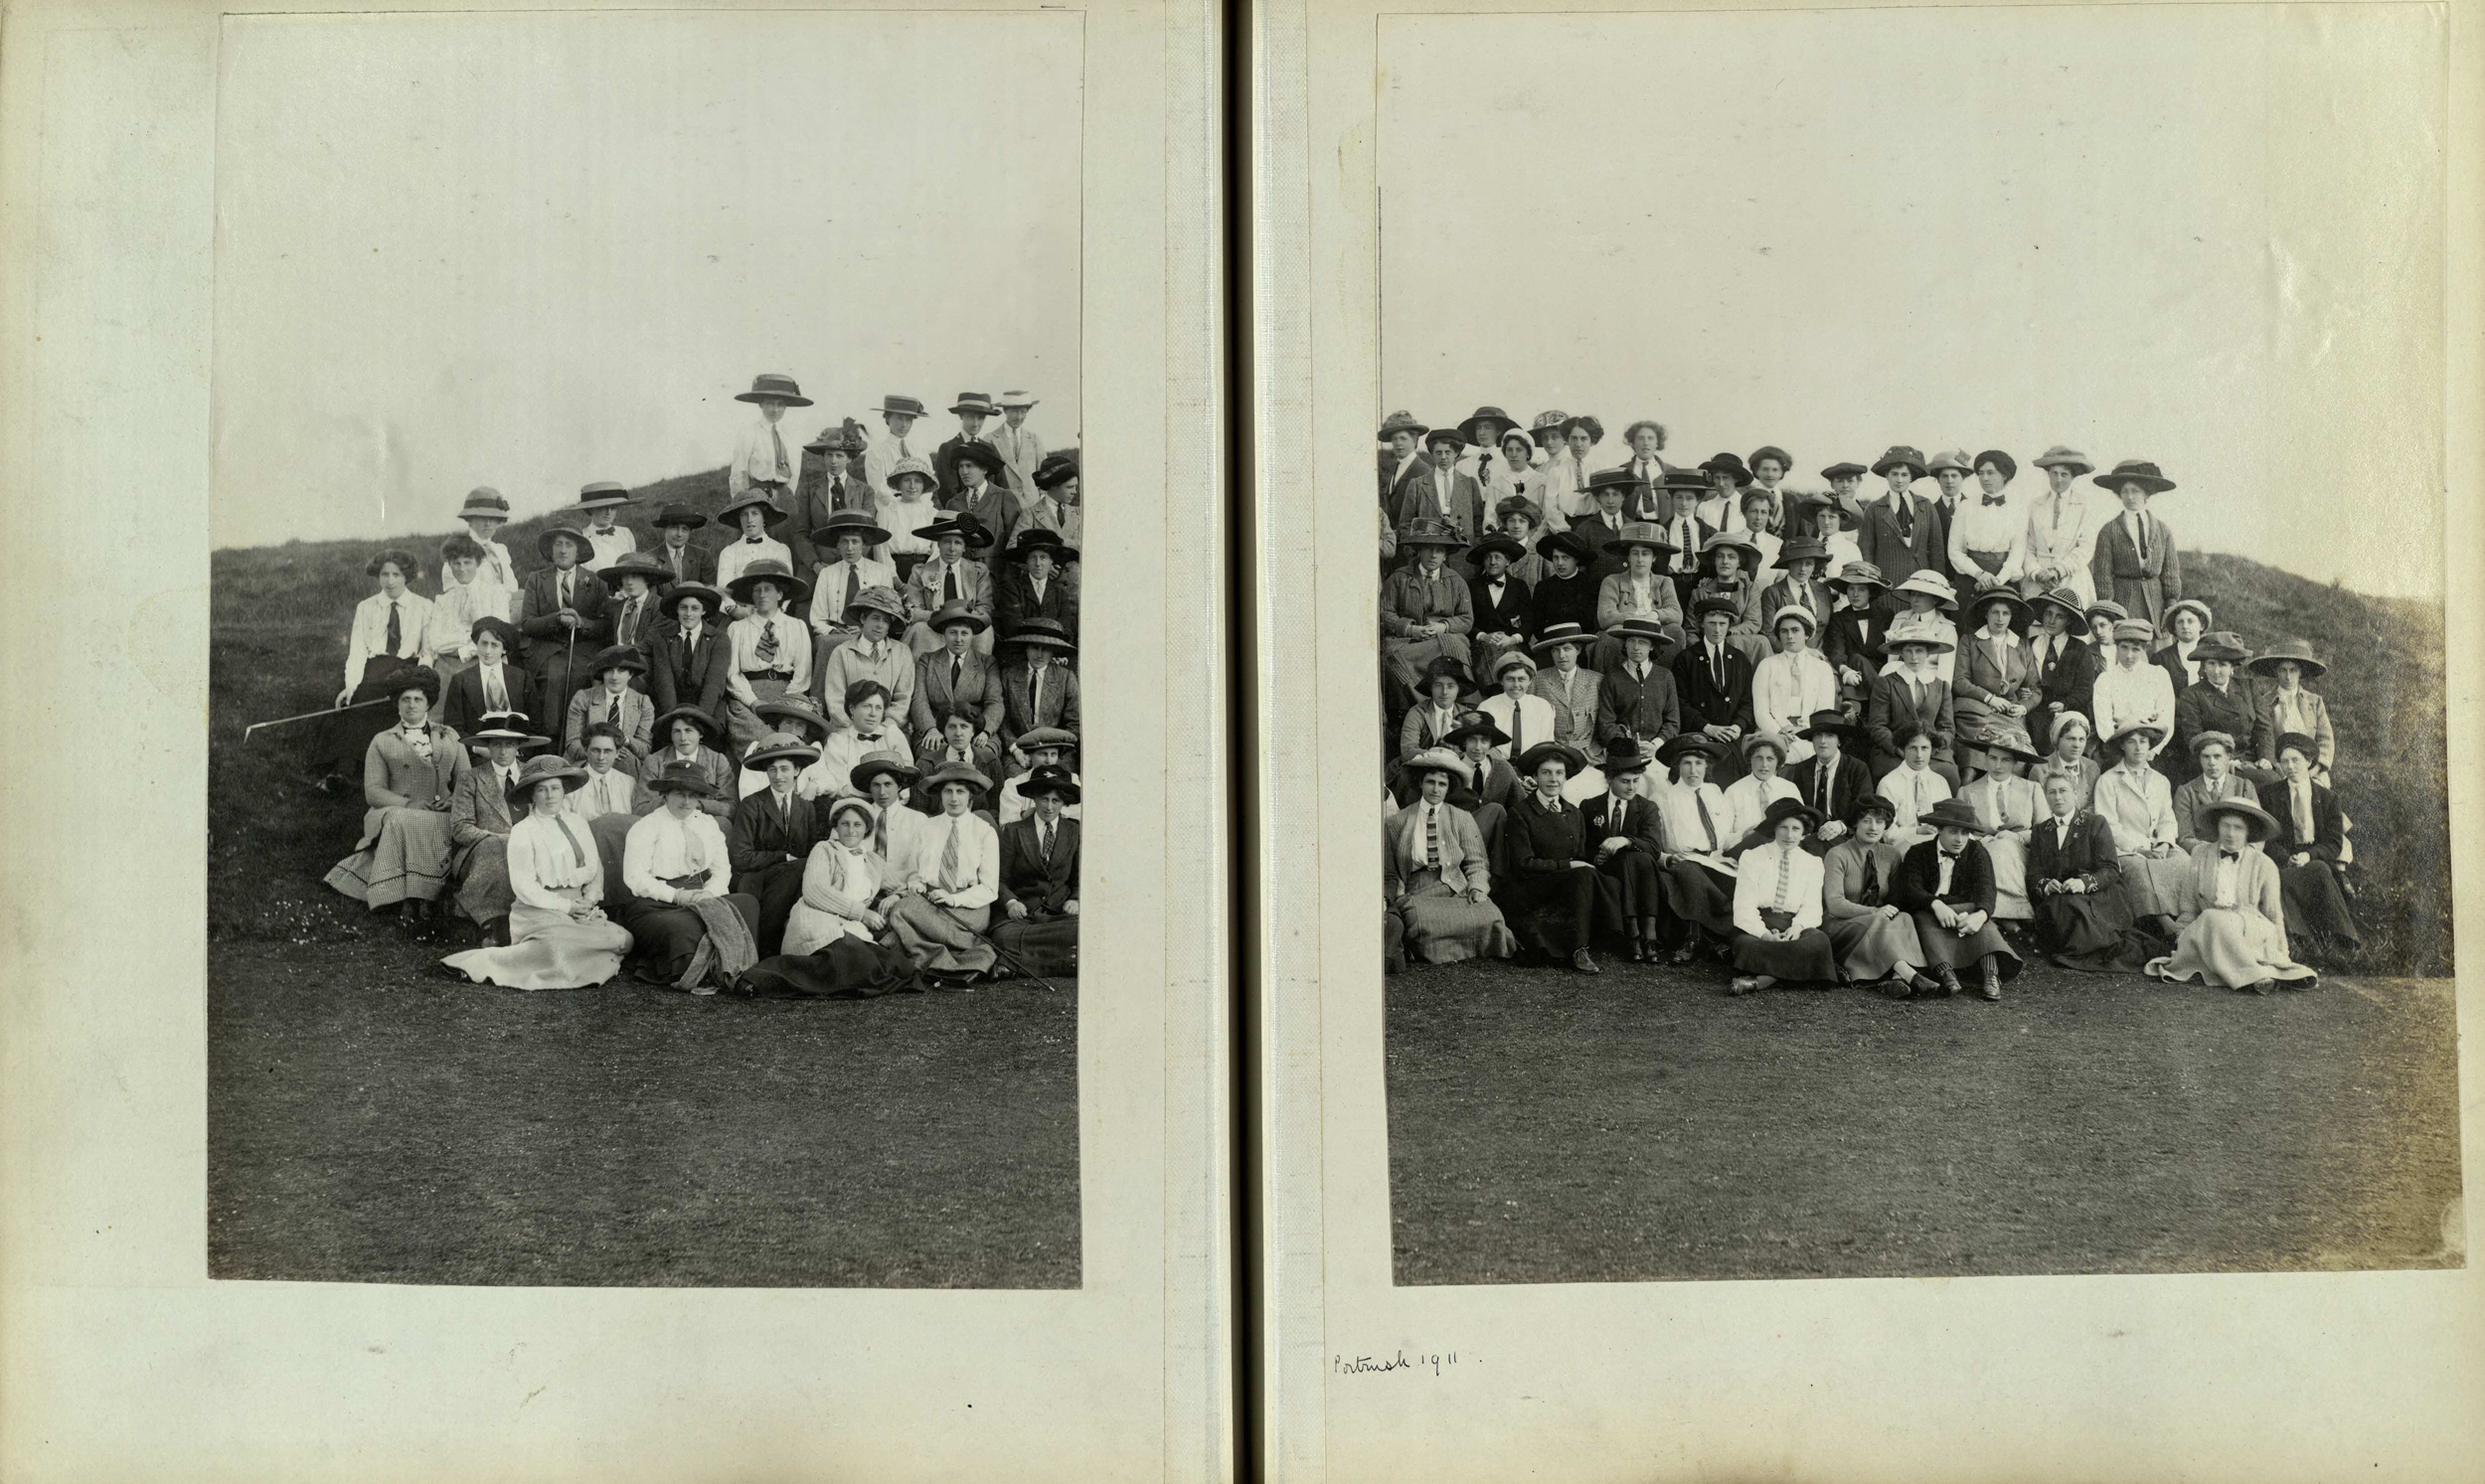 Portrait of the competitors at the Ladies' Home Internationals Royal Portrush Golf Club 12-13 May 1911 (from the University of St Andrews Manuscript Collection)